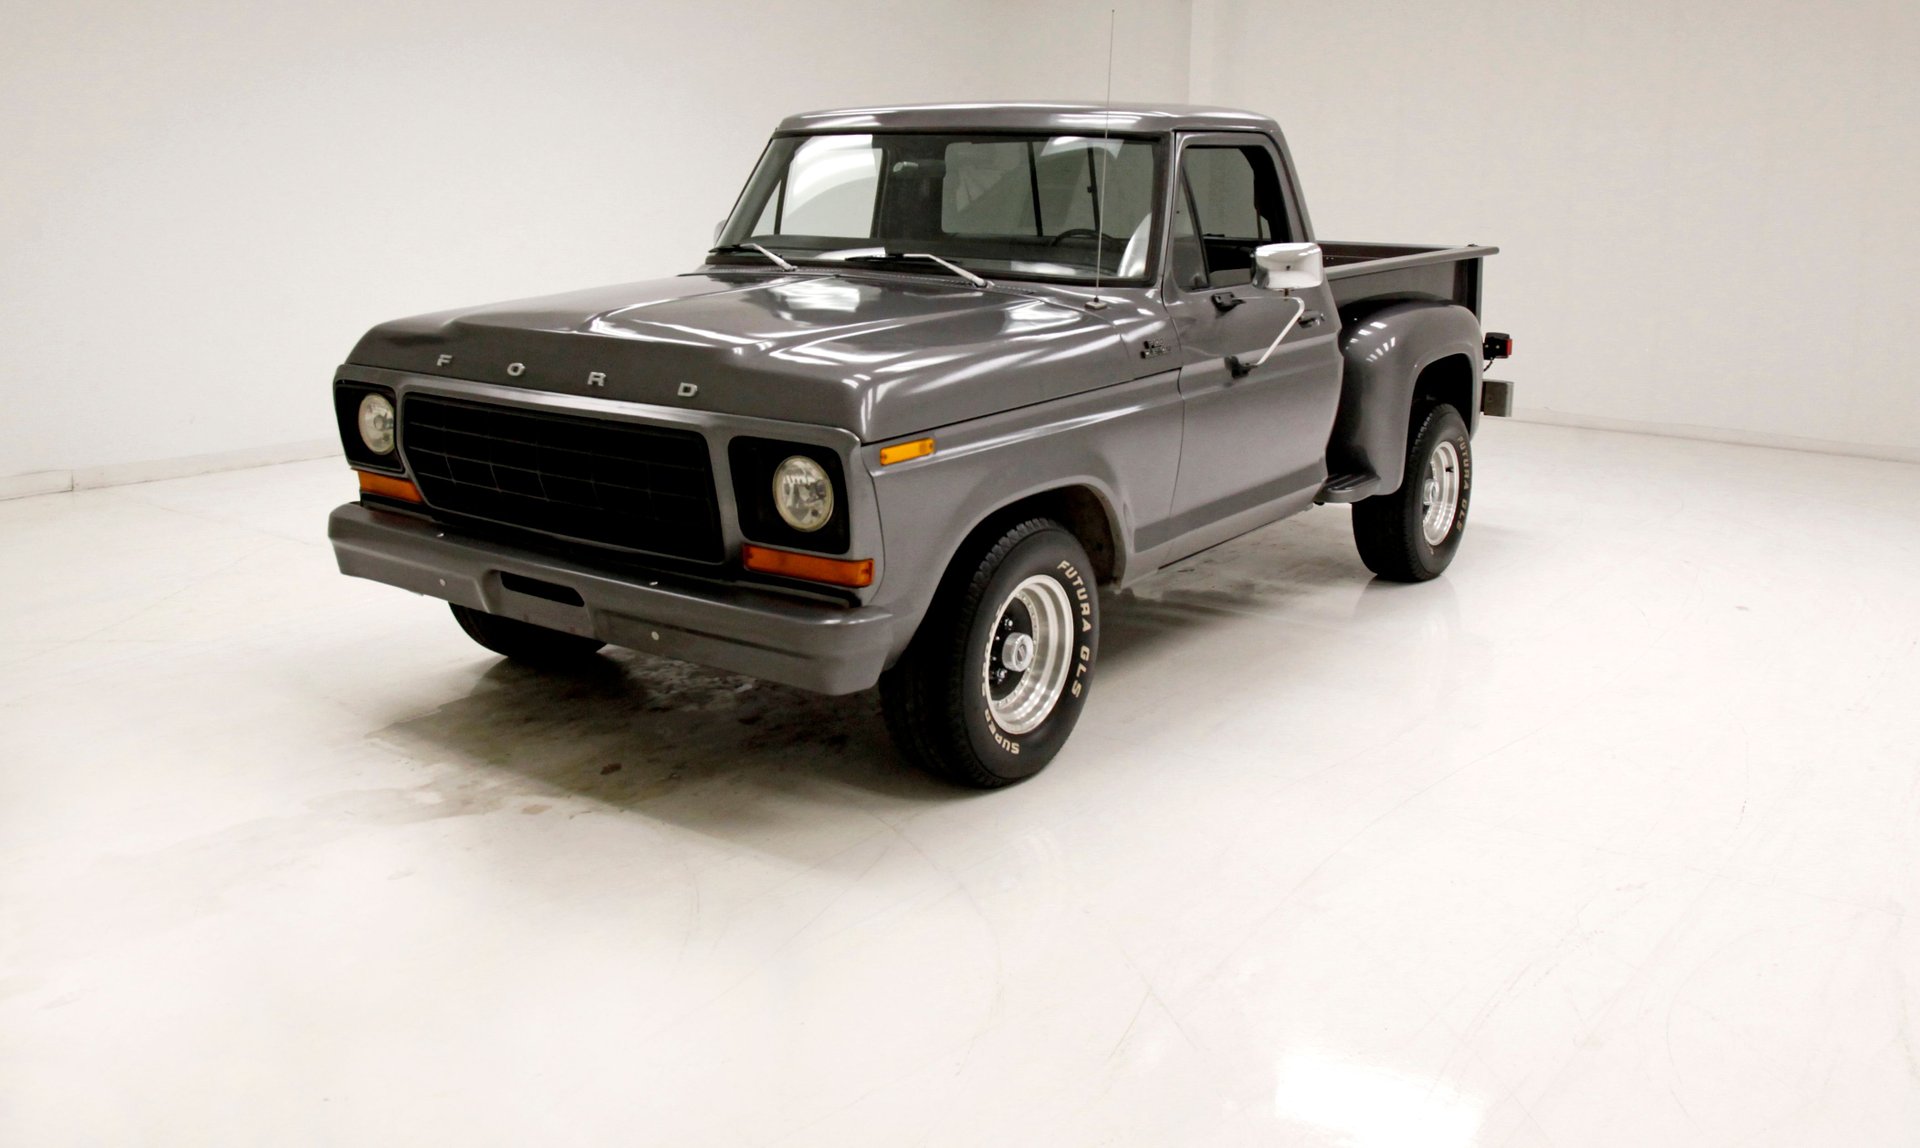 1978 ford f150 4x4 stock